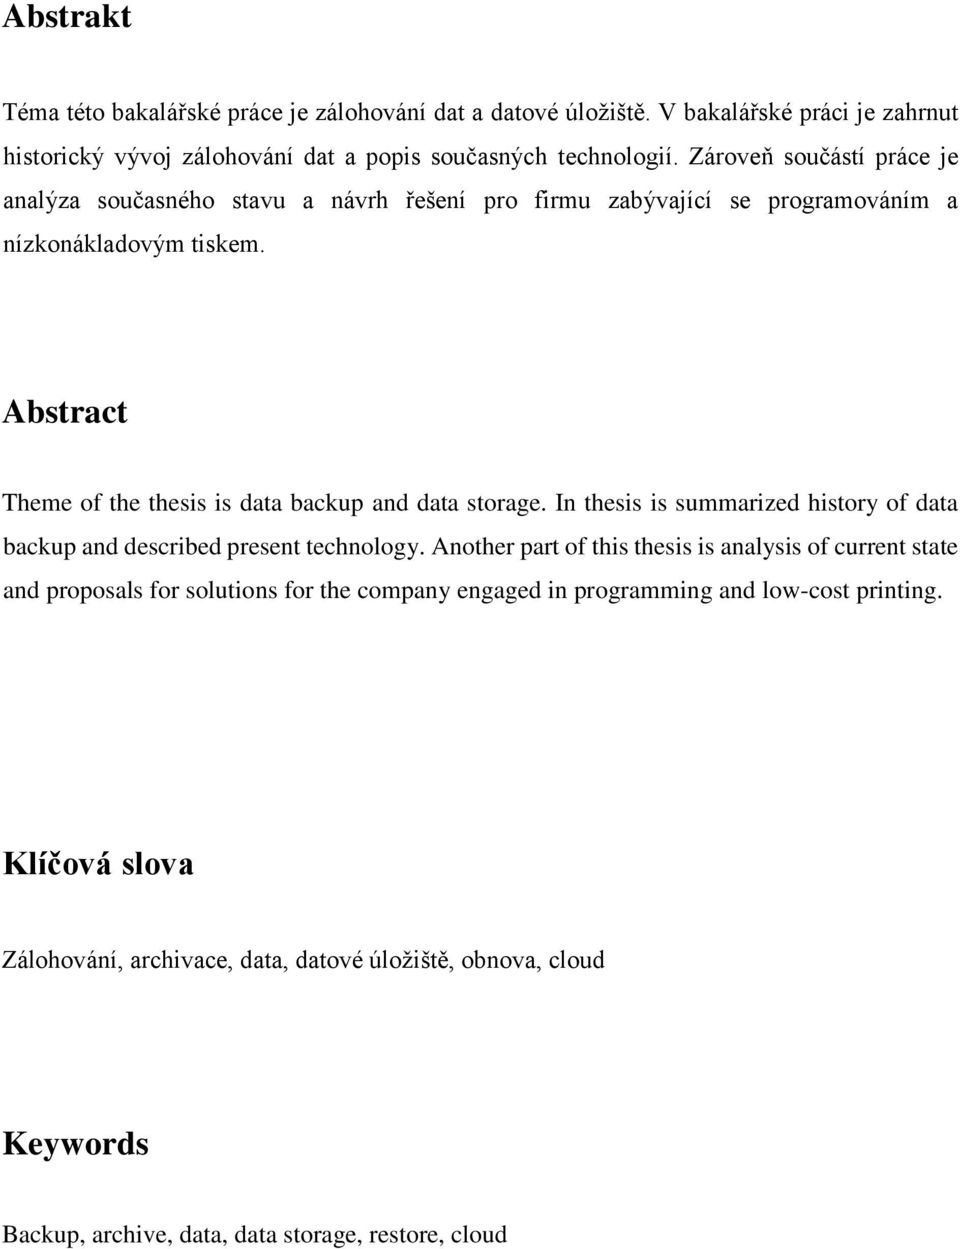 Abstract Theme of the thesis is data backup and data storage. In thesis is summarized history of data backup and described present technology.